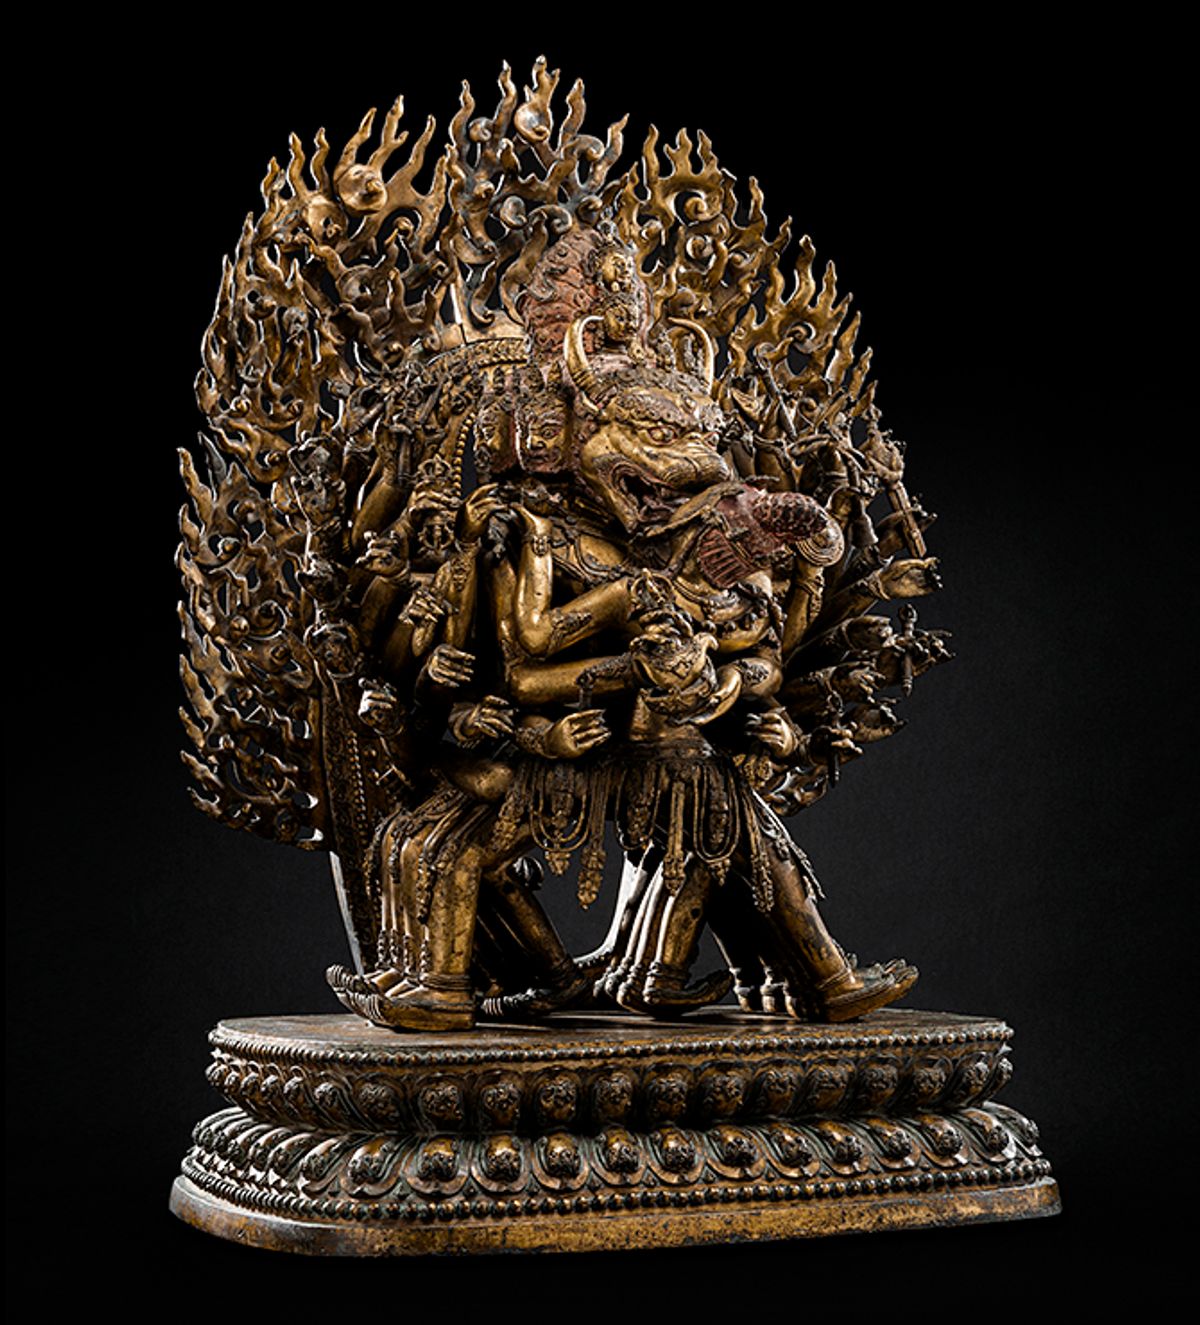 The gold and bronze Ming-dynasty sculpture portraying the god Vajrabhairava Courtesy of Nagel Auktionen